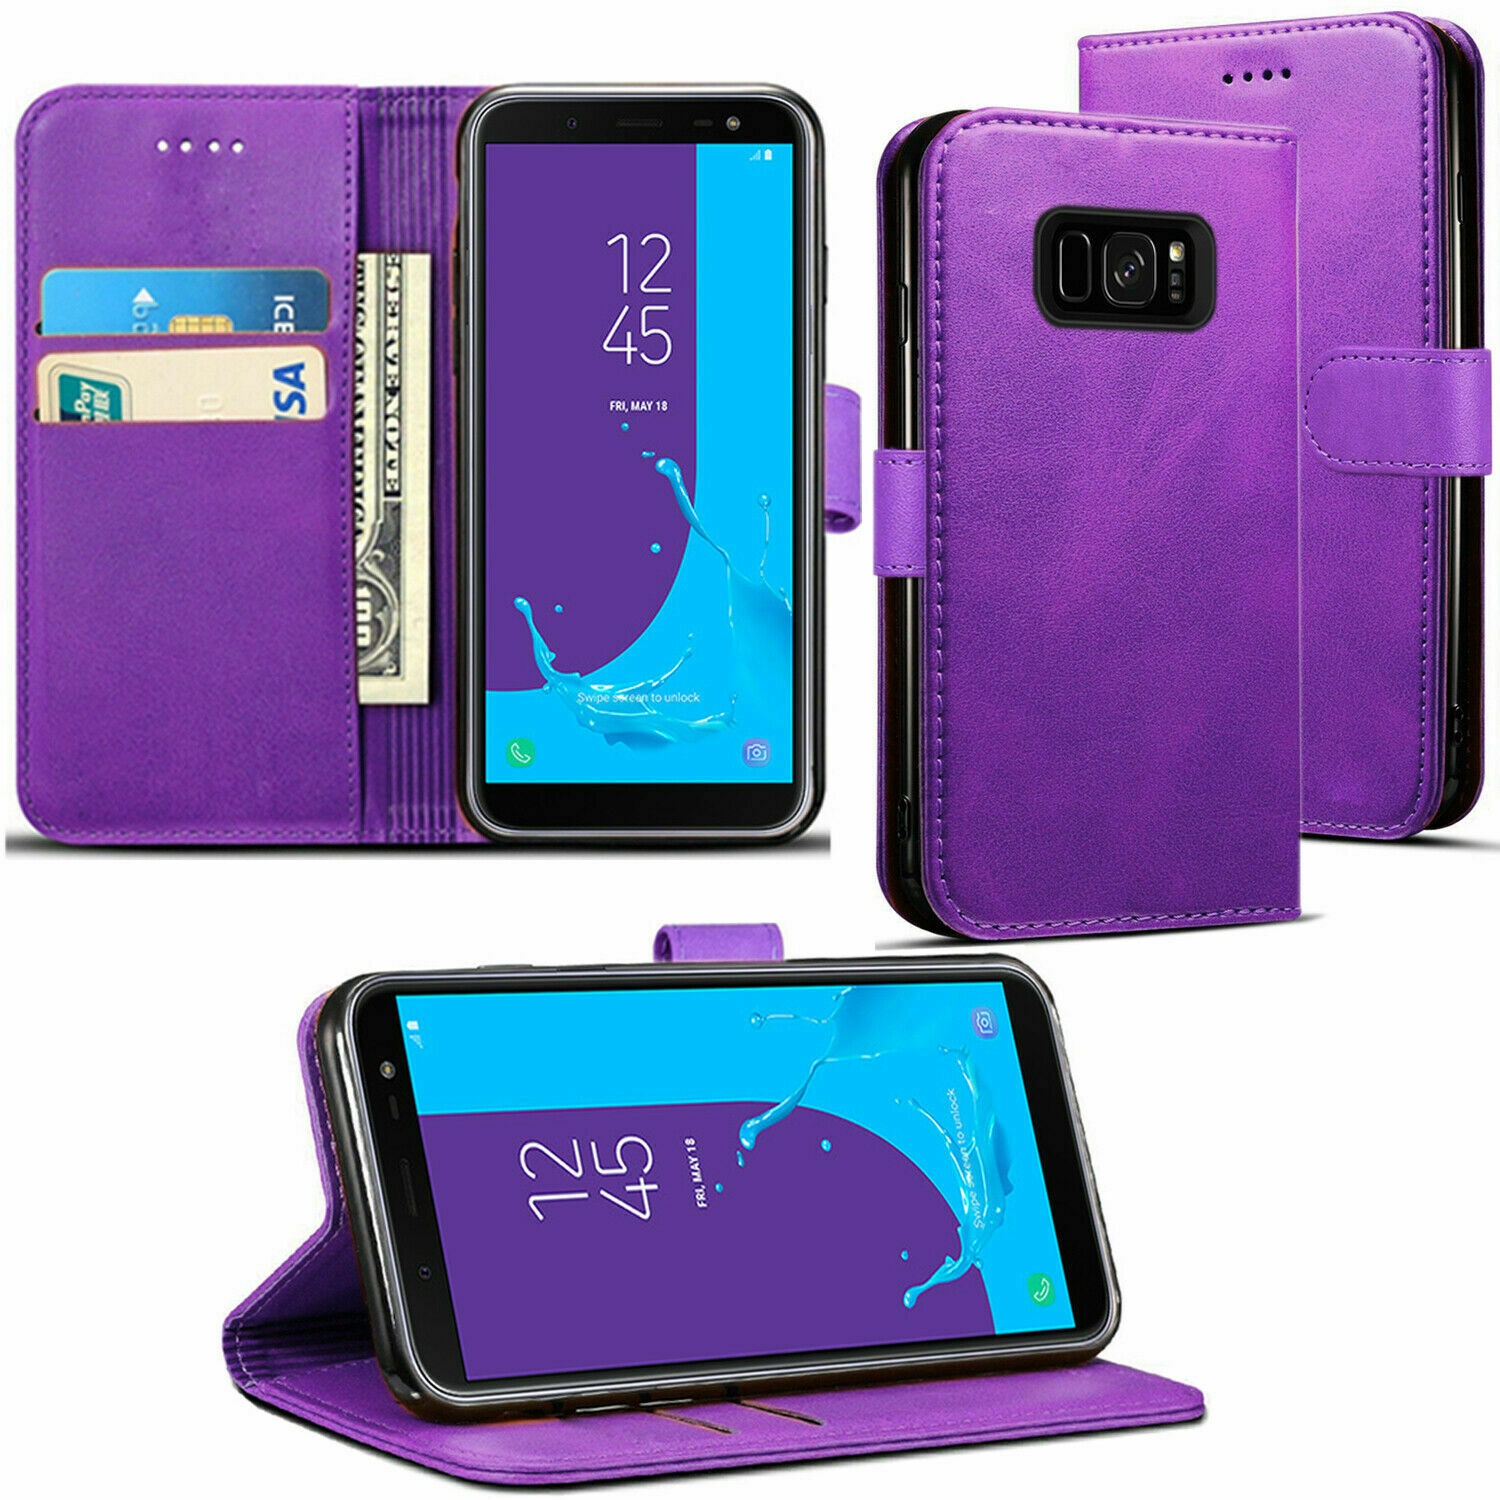 【CSmart】 Magnetic Card Slot Leather Folio Wallet Flip Case Cover for Samsung Galaxy S6, Purple